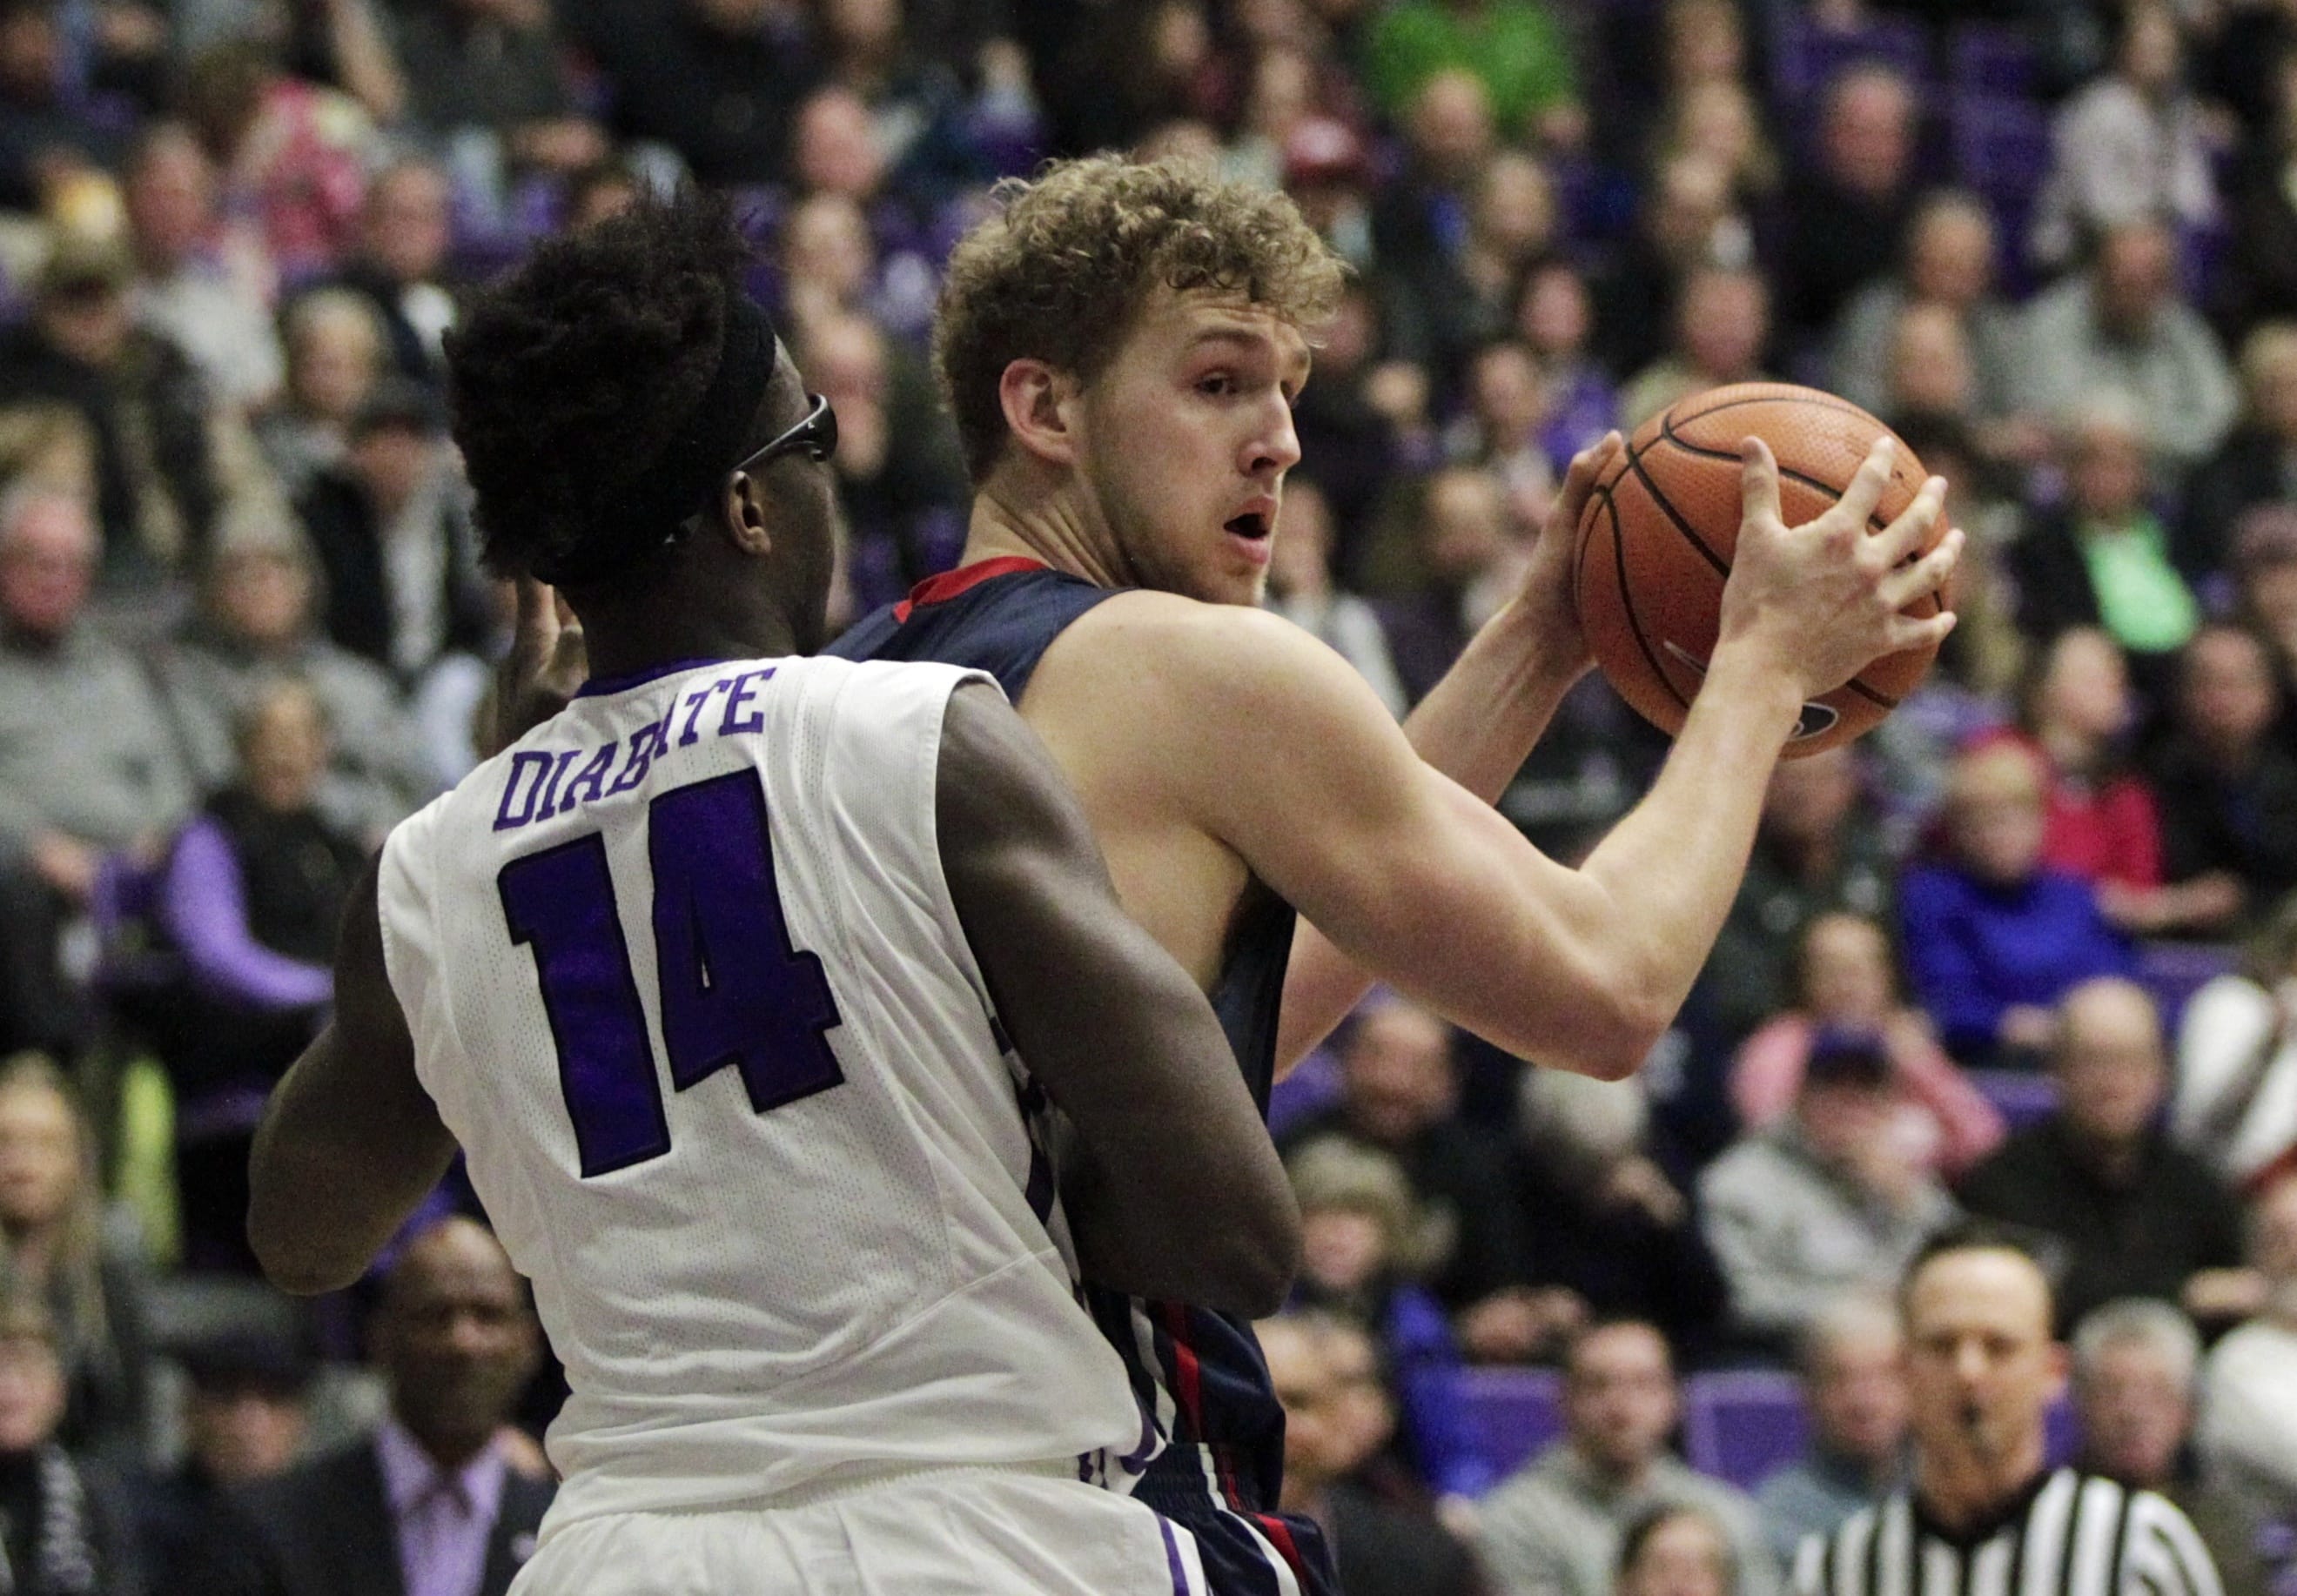 Saint Mary's center Jock Landale, right, looks to pass as Portland forward Tahirou Diabate defends during the first half of an NCAA college basketball game in Portland, Ore., Saturday, Feb. 17, 2018.